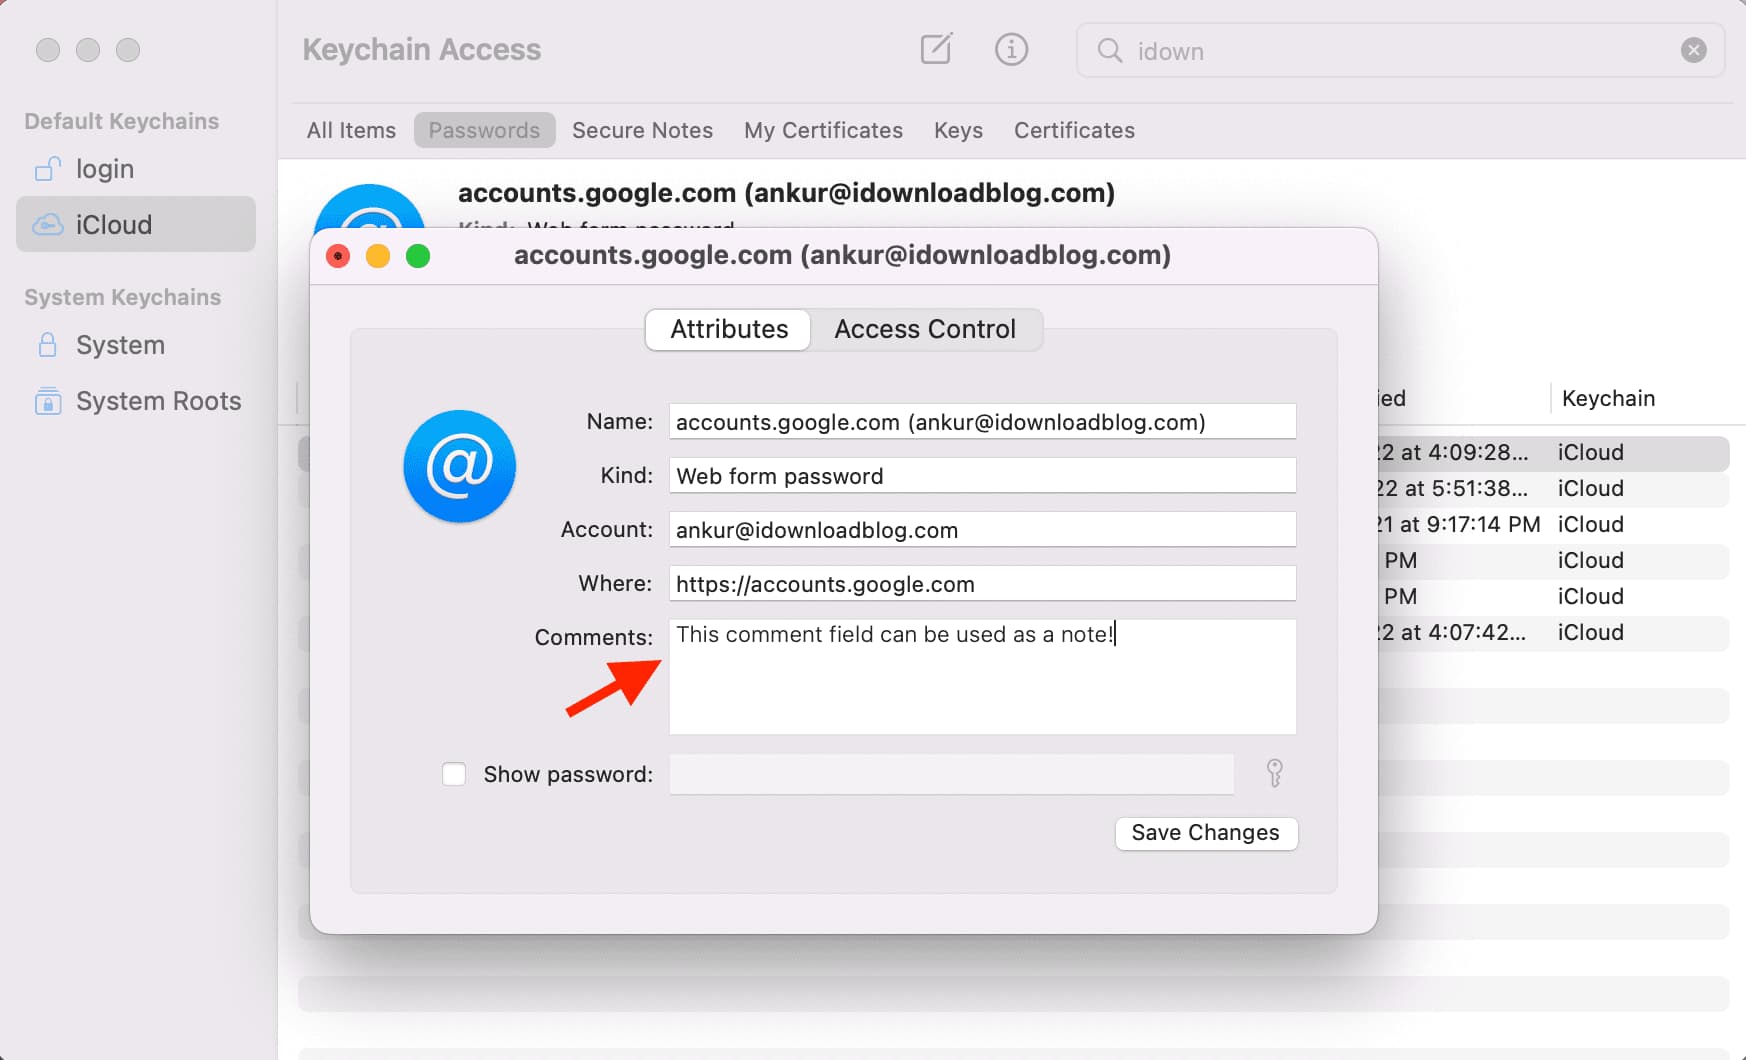 Comment in Keychain Access on Mac